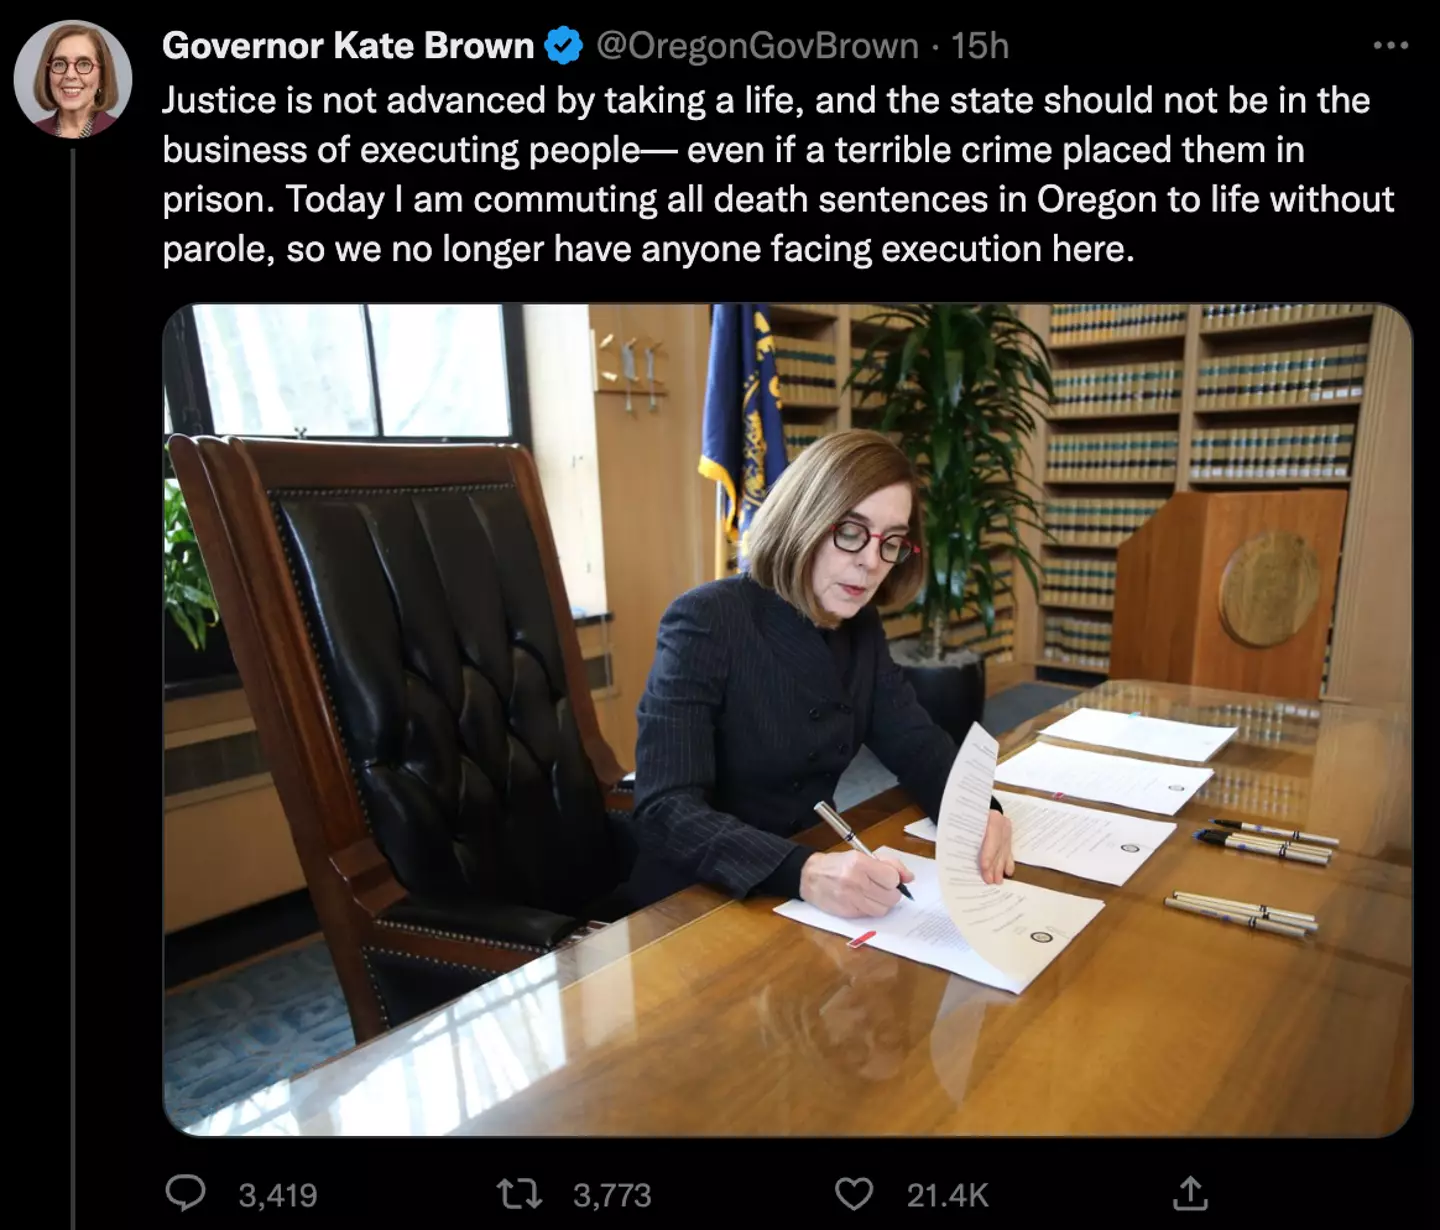 Governor Brown has called the death penalty 'immoral'.